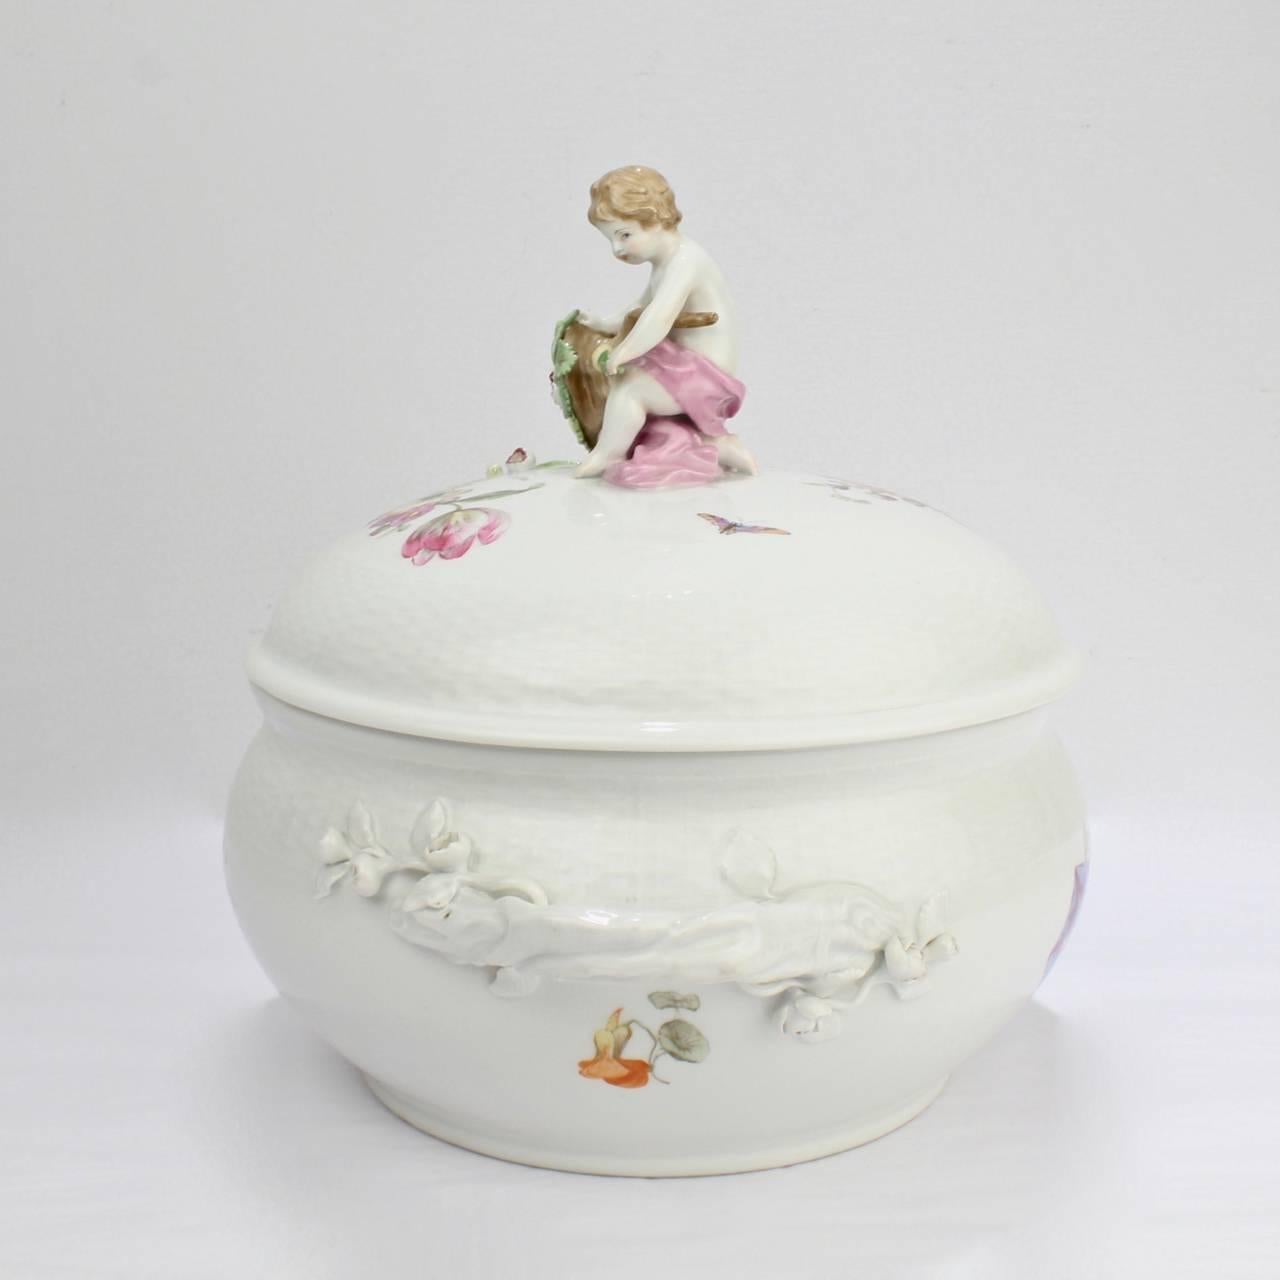 A fine antique KPM porcelain tureen with flower encrusted handles, Deutsche Blumen floral sprays, and a figural cherub and cornucopia finial. 

The base bears a blue underglaze factory scepter mark, an iron-red orb mark, and iron cross mark, and